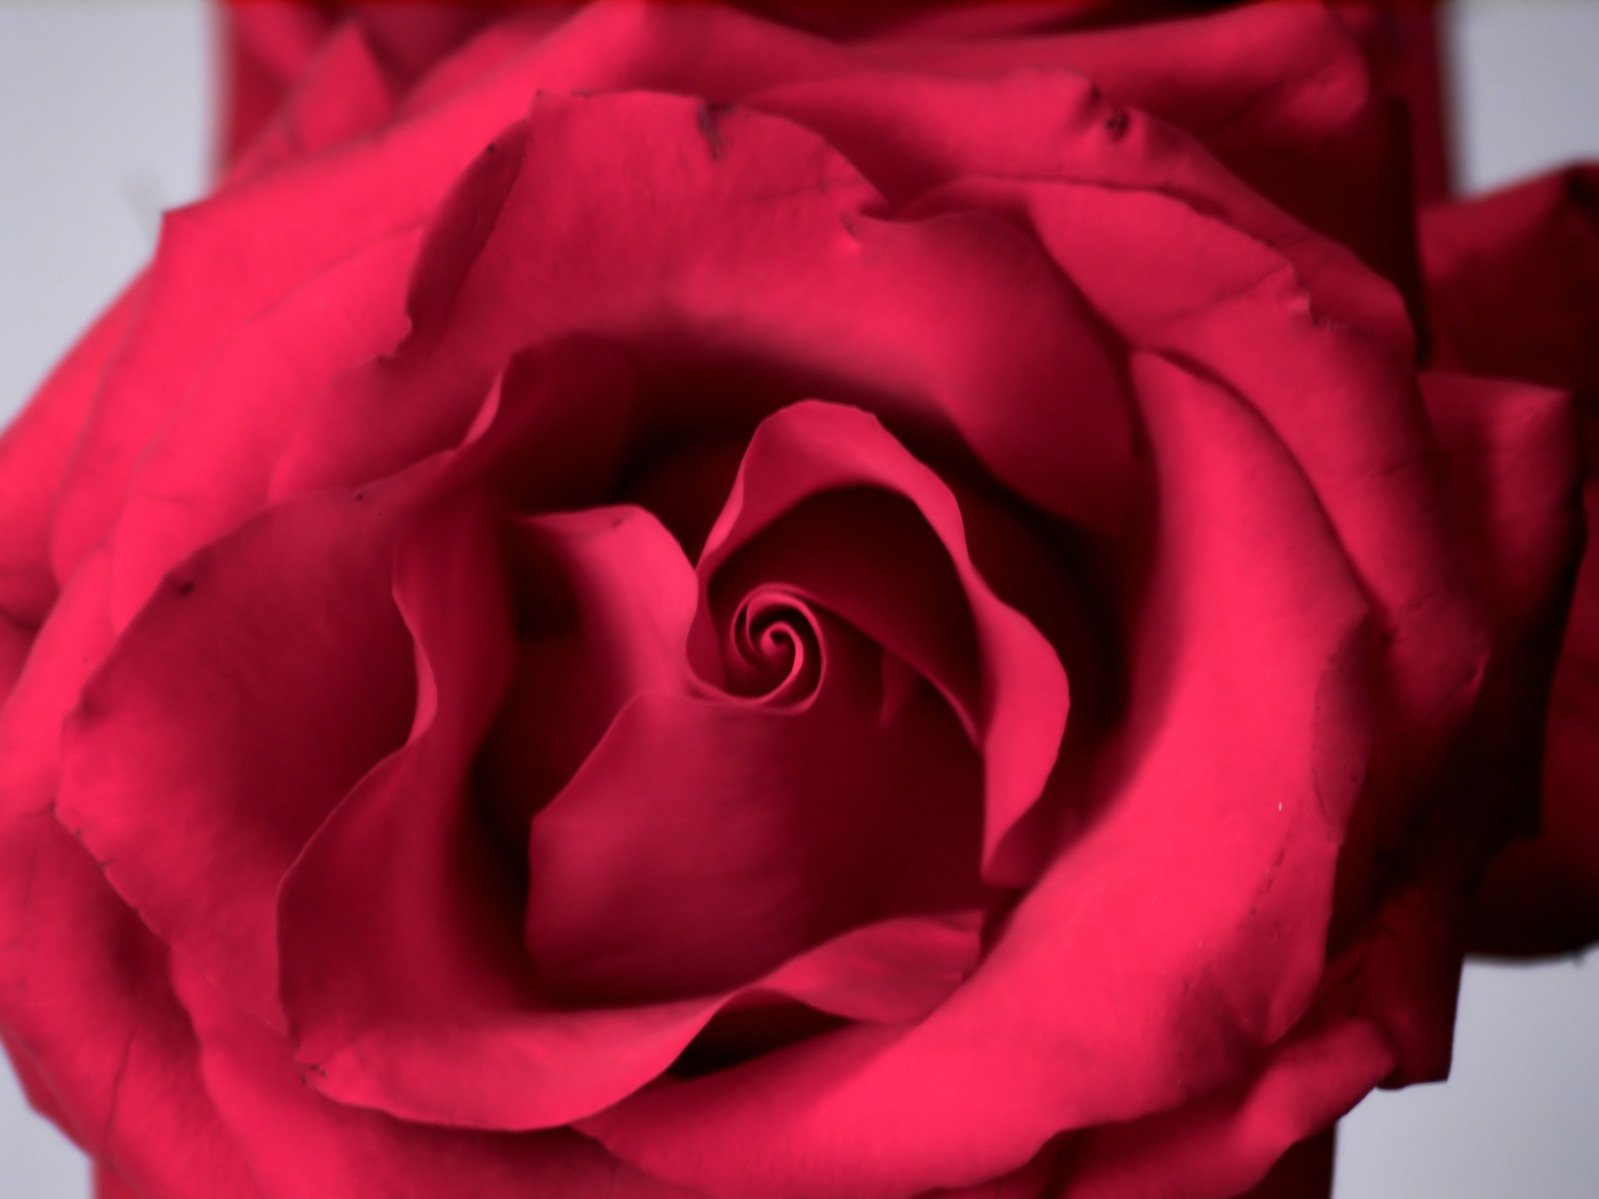 the center section of a pink rose in closeup